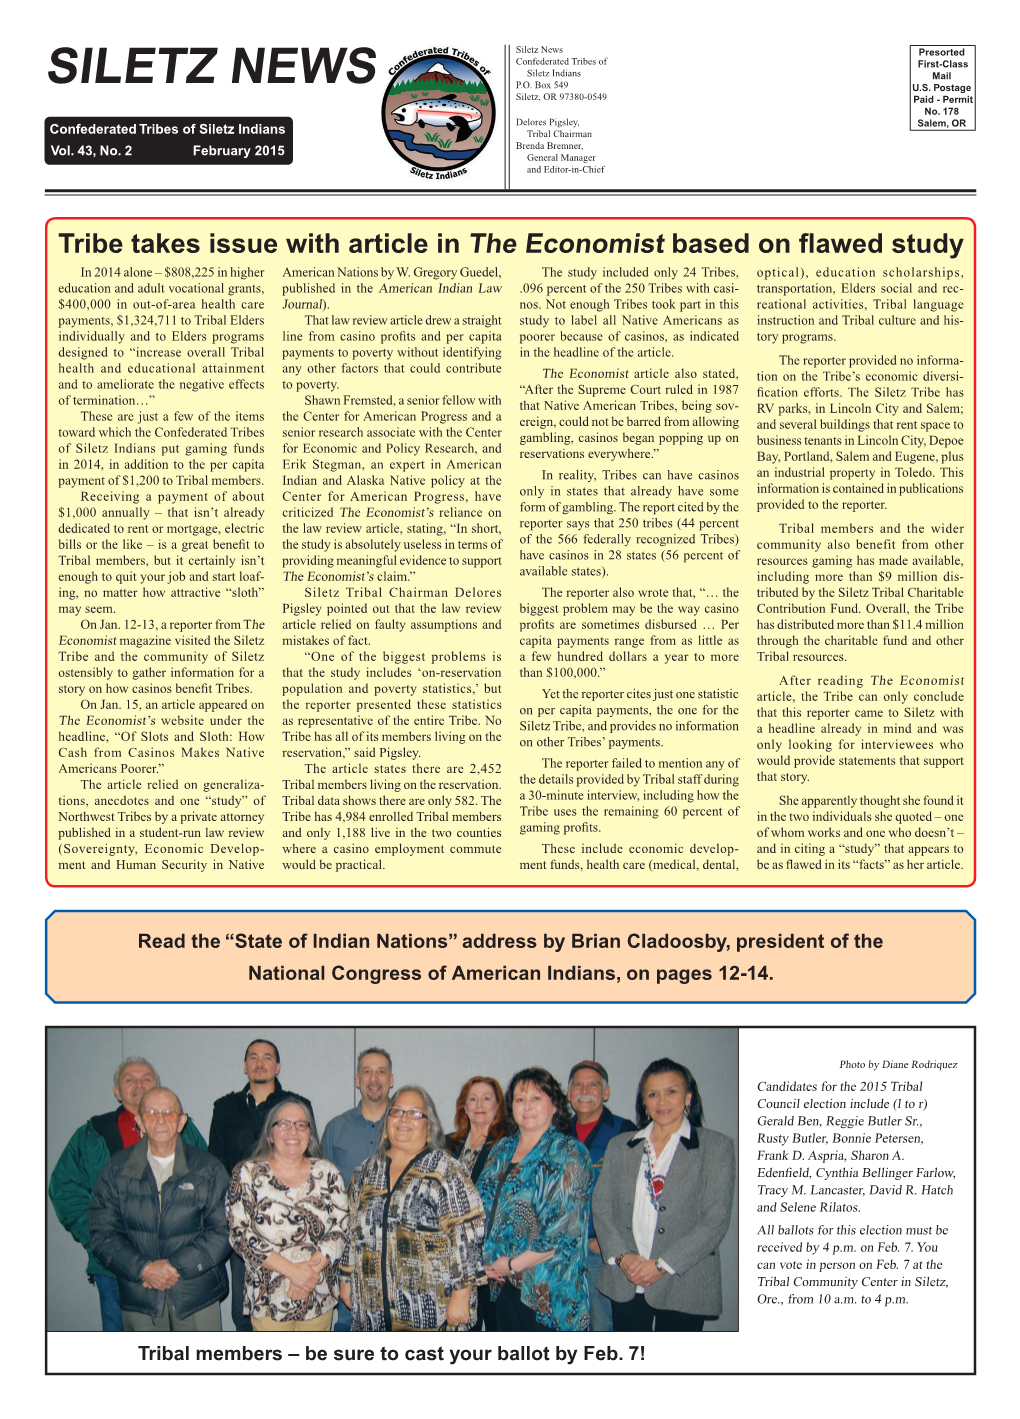 Siletz News Presorted Confederated Tribes of First-Class Siletz Indians Mail SILETZ News P.O